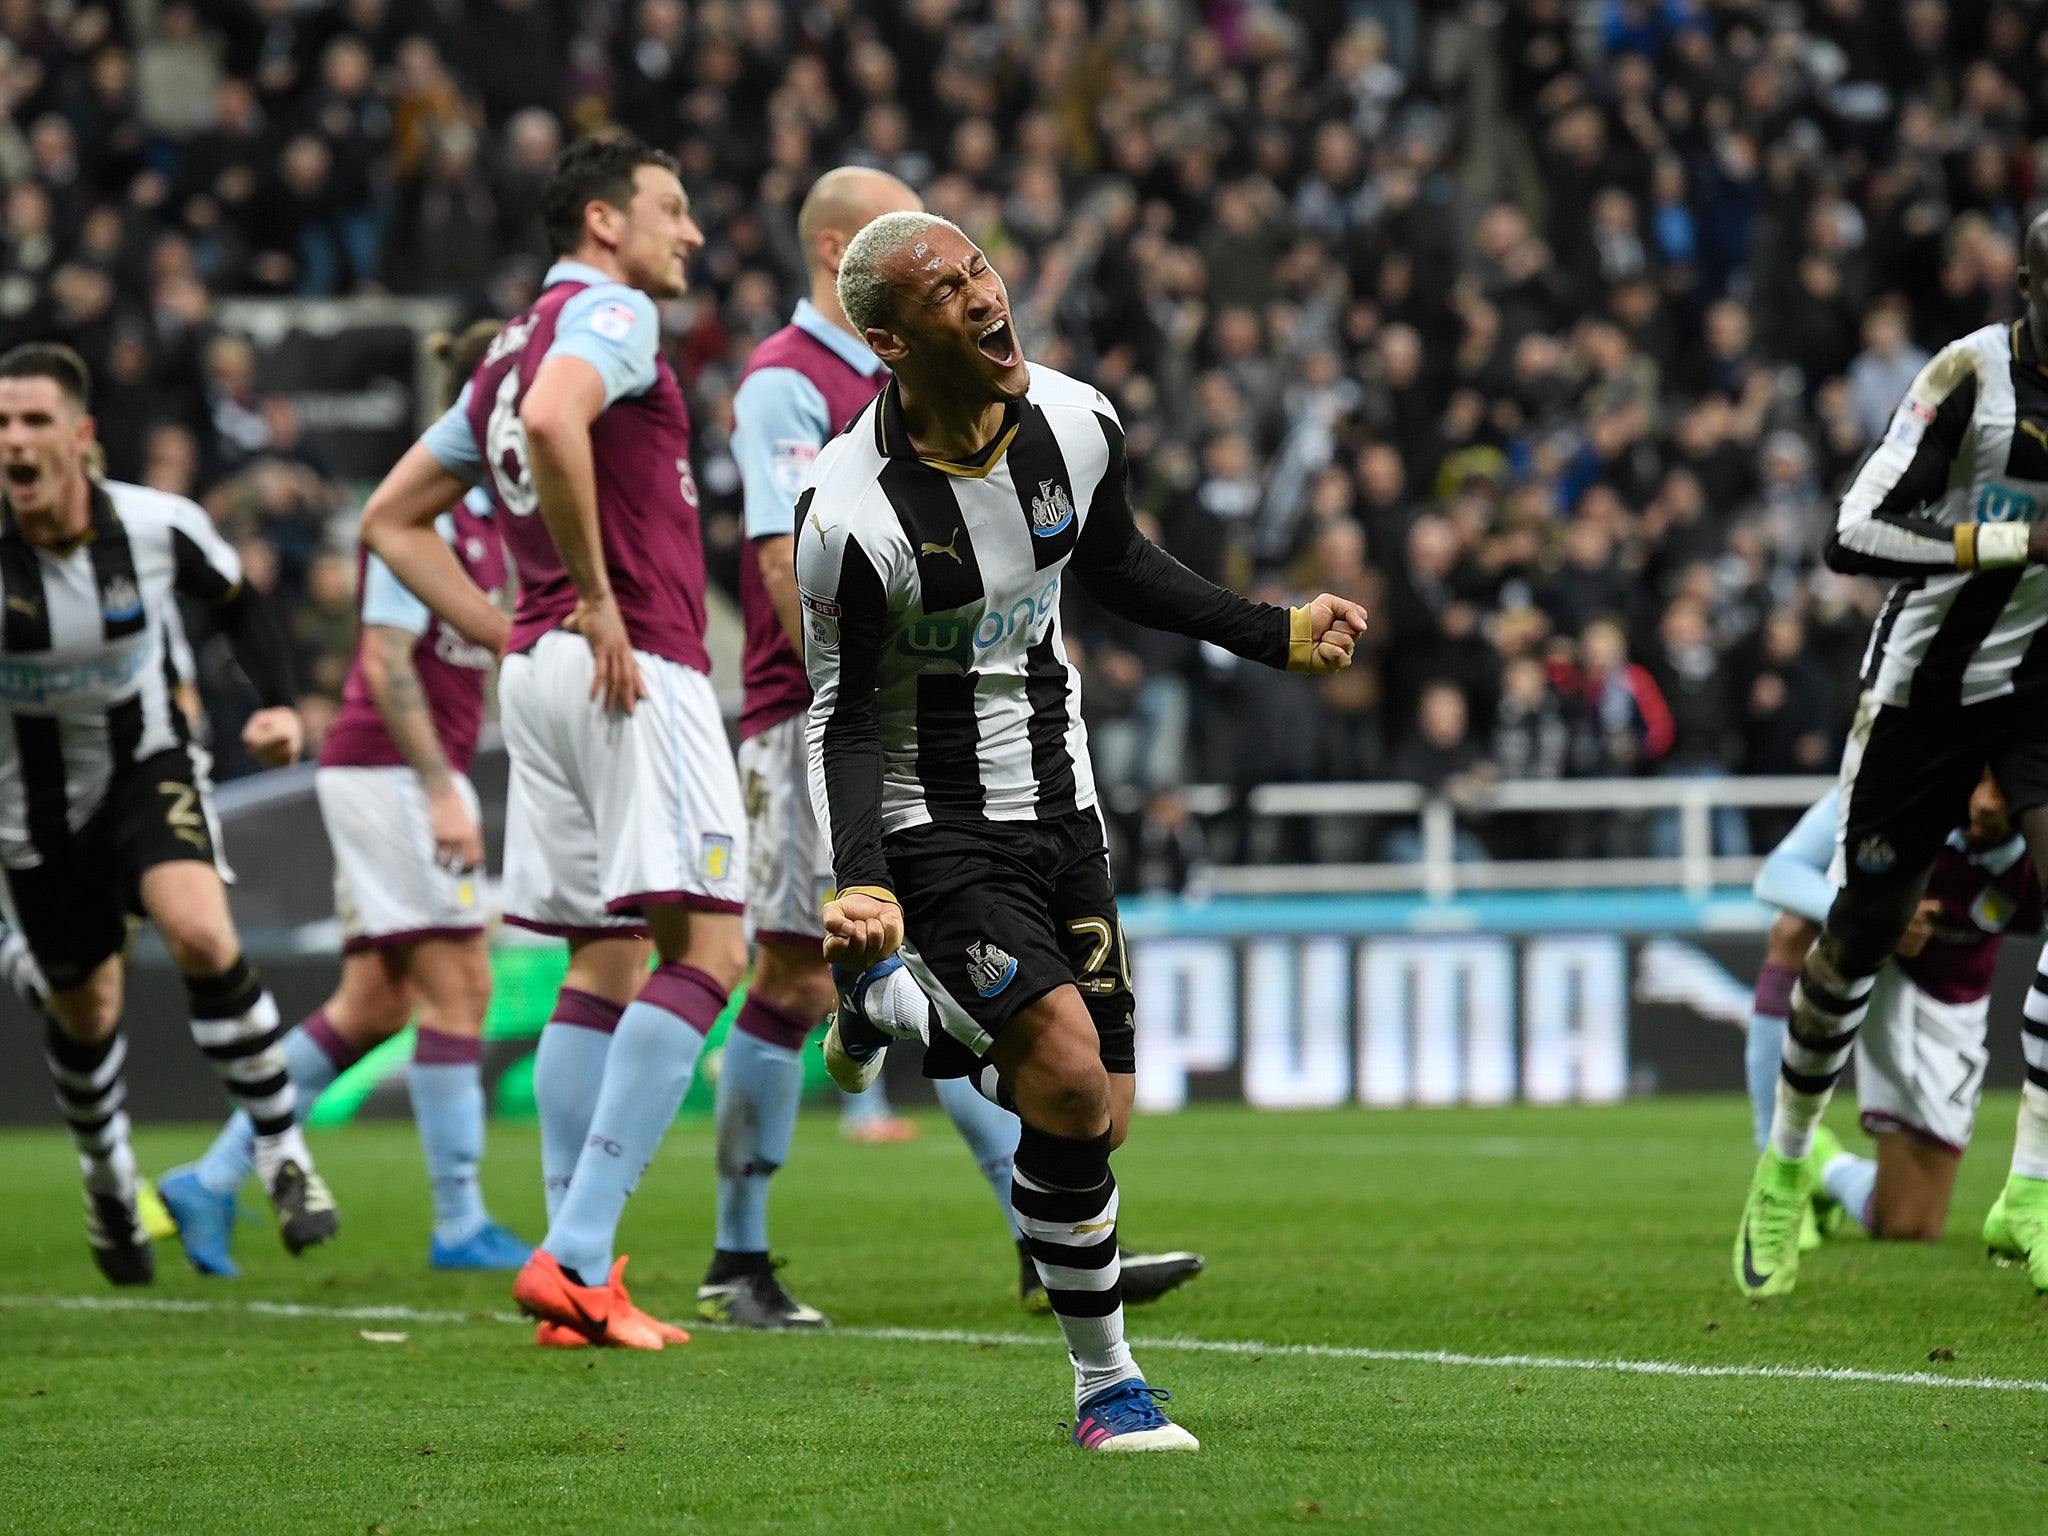 Yoan Gouffran scored the opener before Henri Lansbury turned the ball into his own net